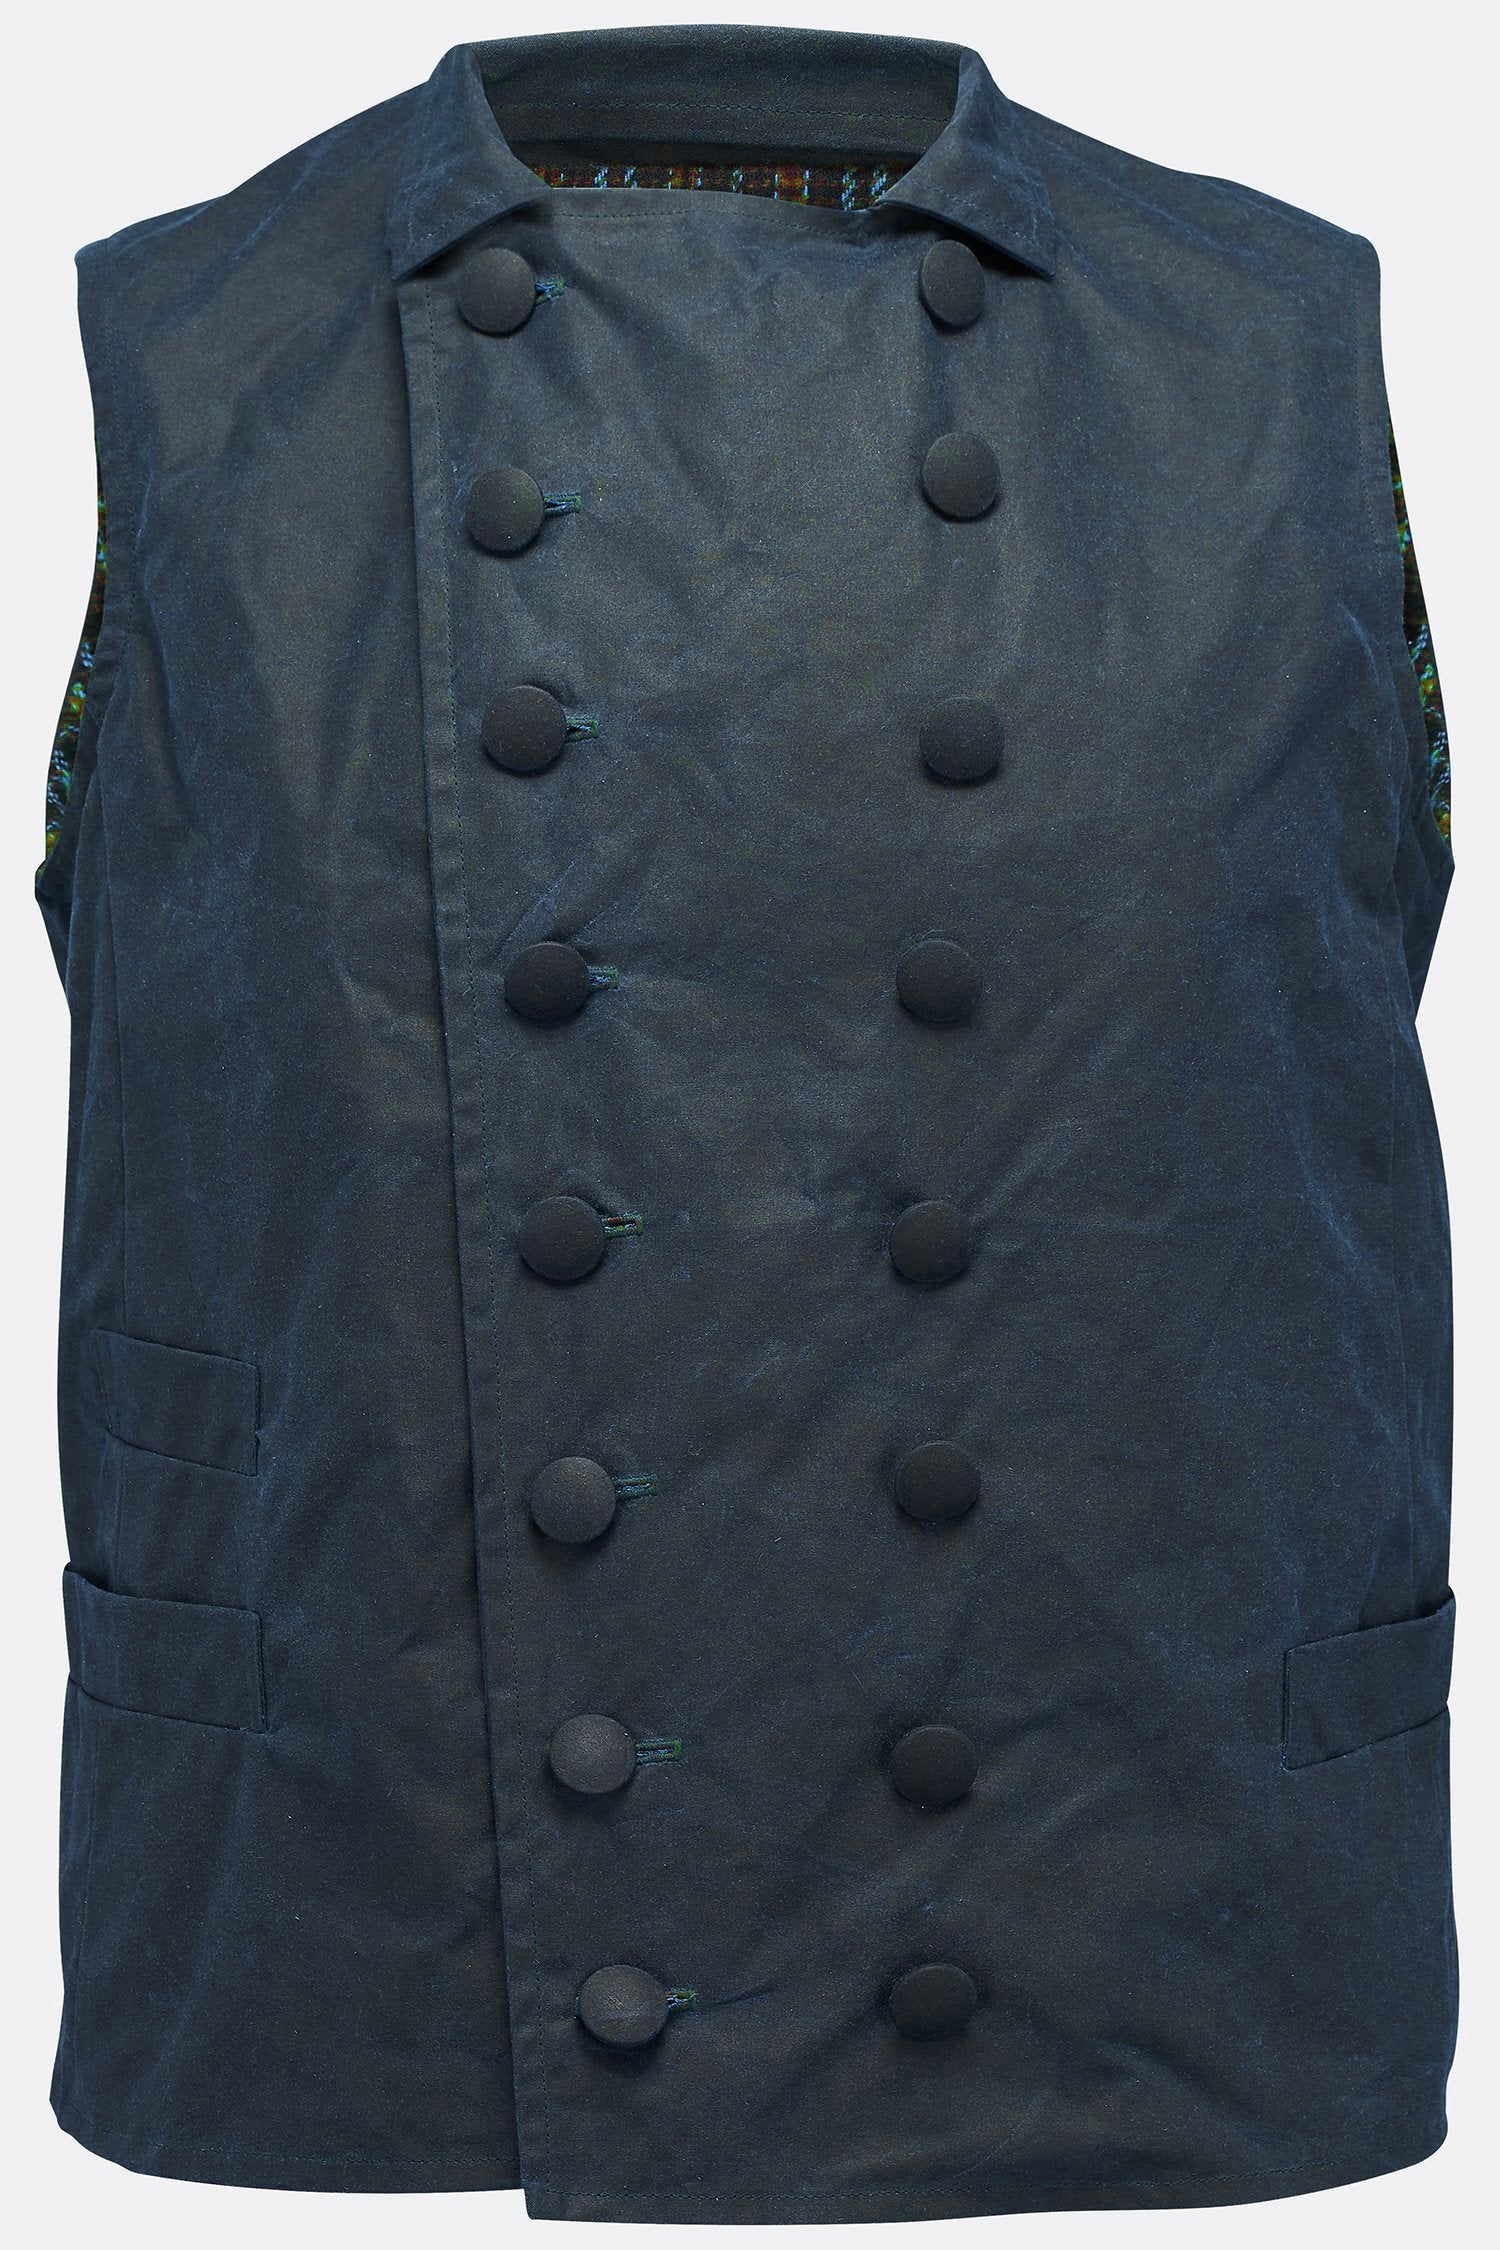 SHEPPARD WAISTCOAT IN NAVY WAXED COTTON-menswear-A Child Of The Jago